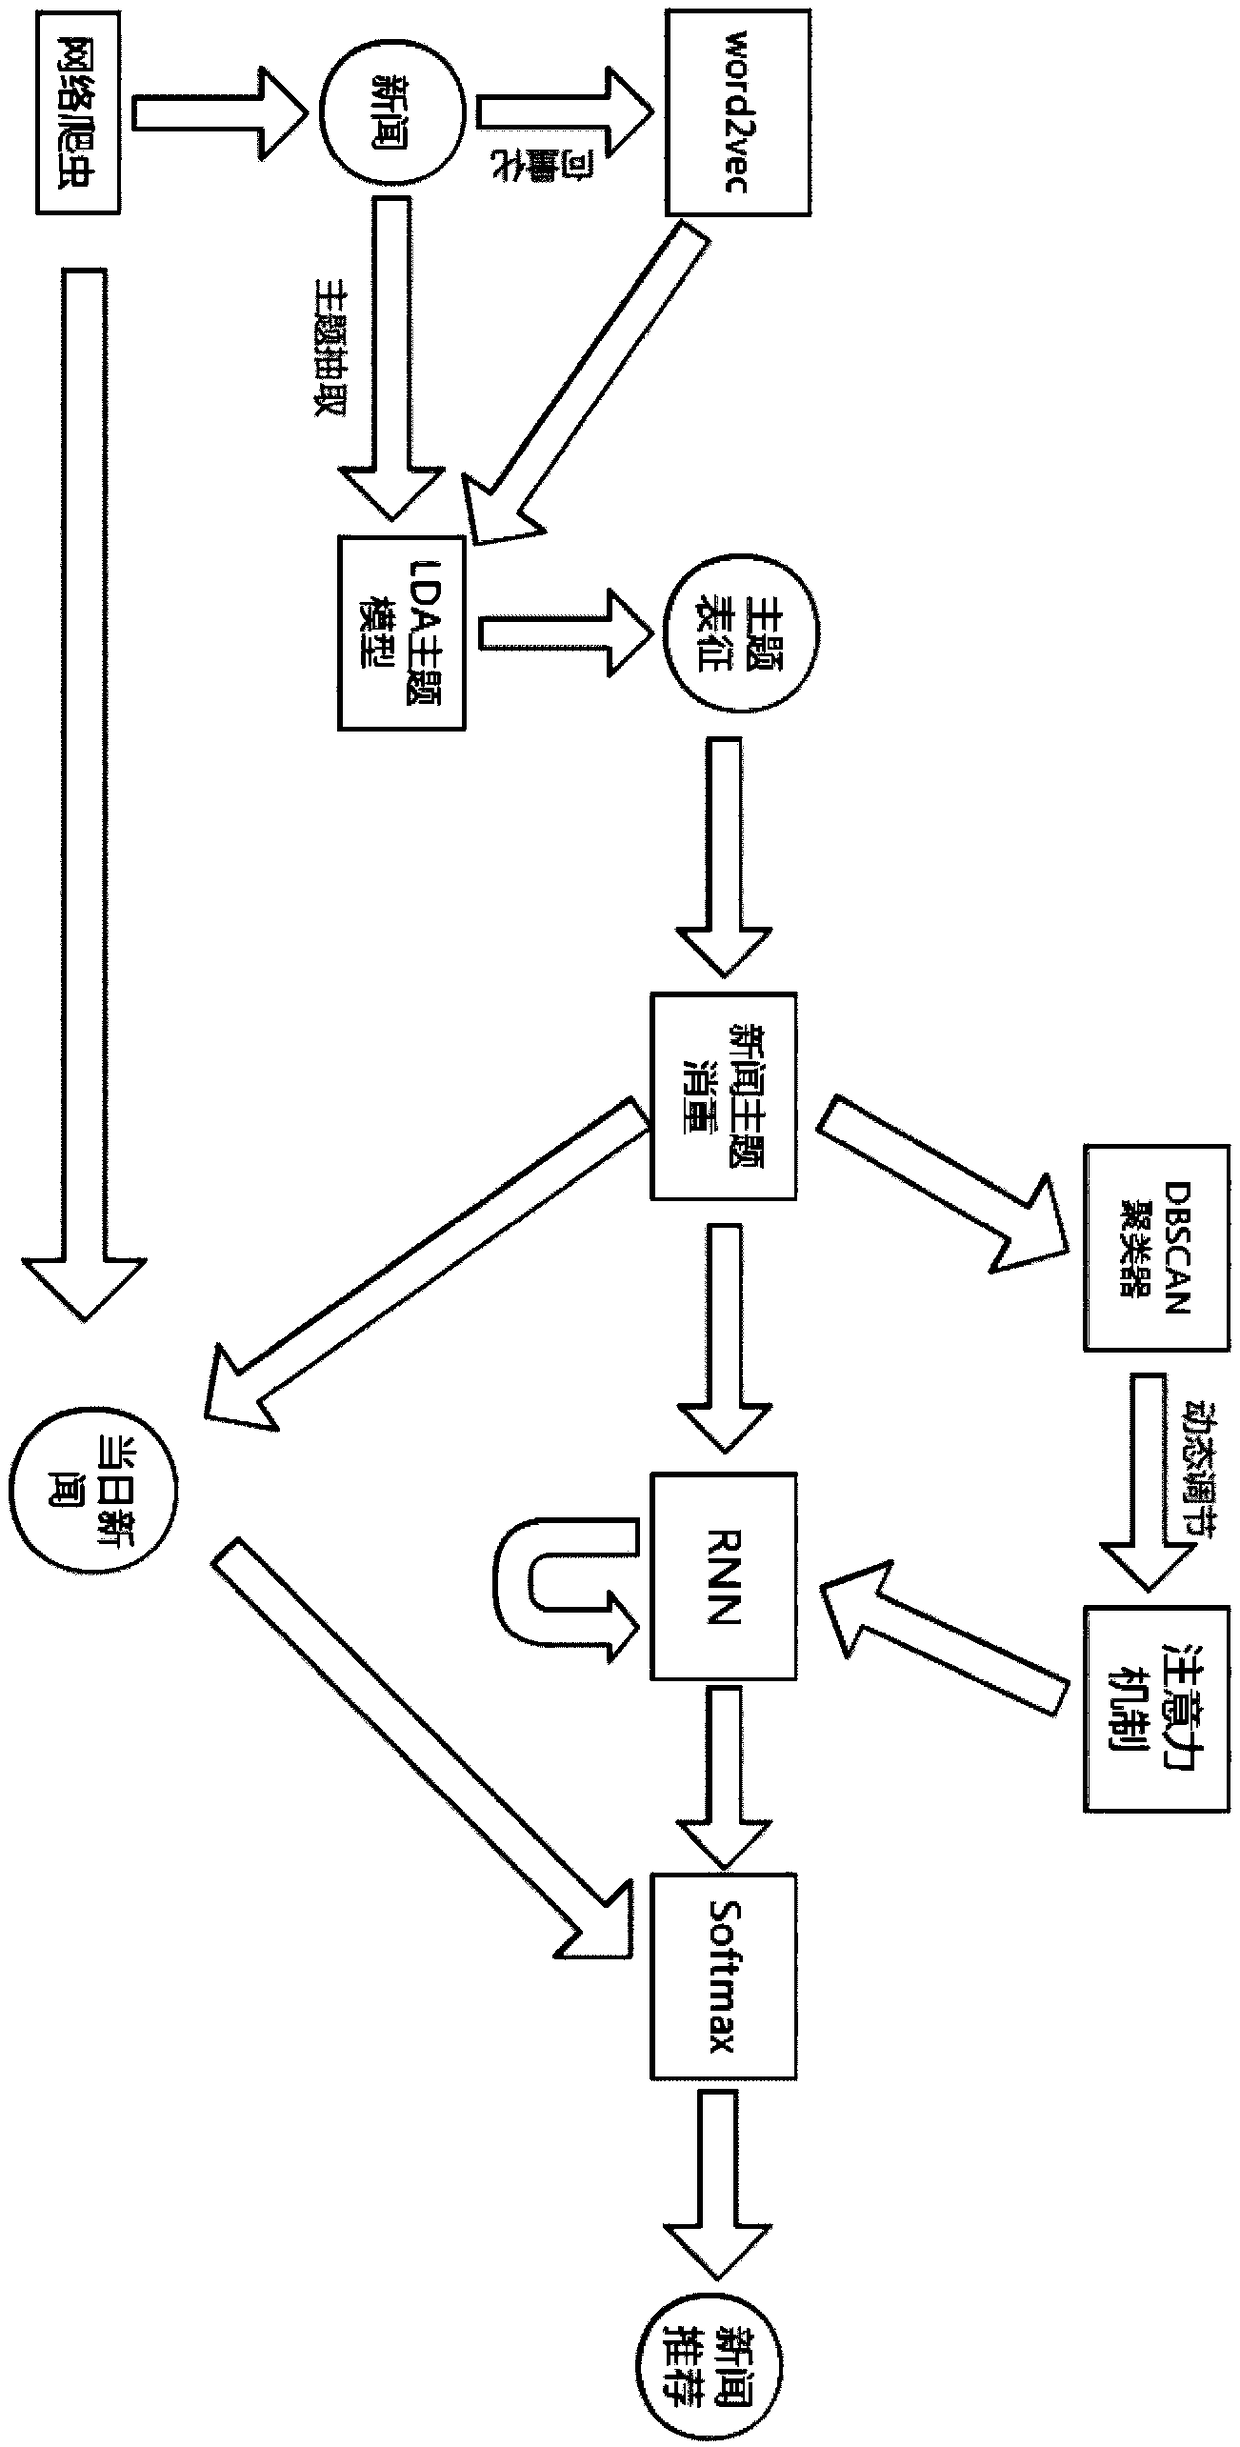 News recommendation method and topic characterization method based on RNN and attention mechanism